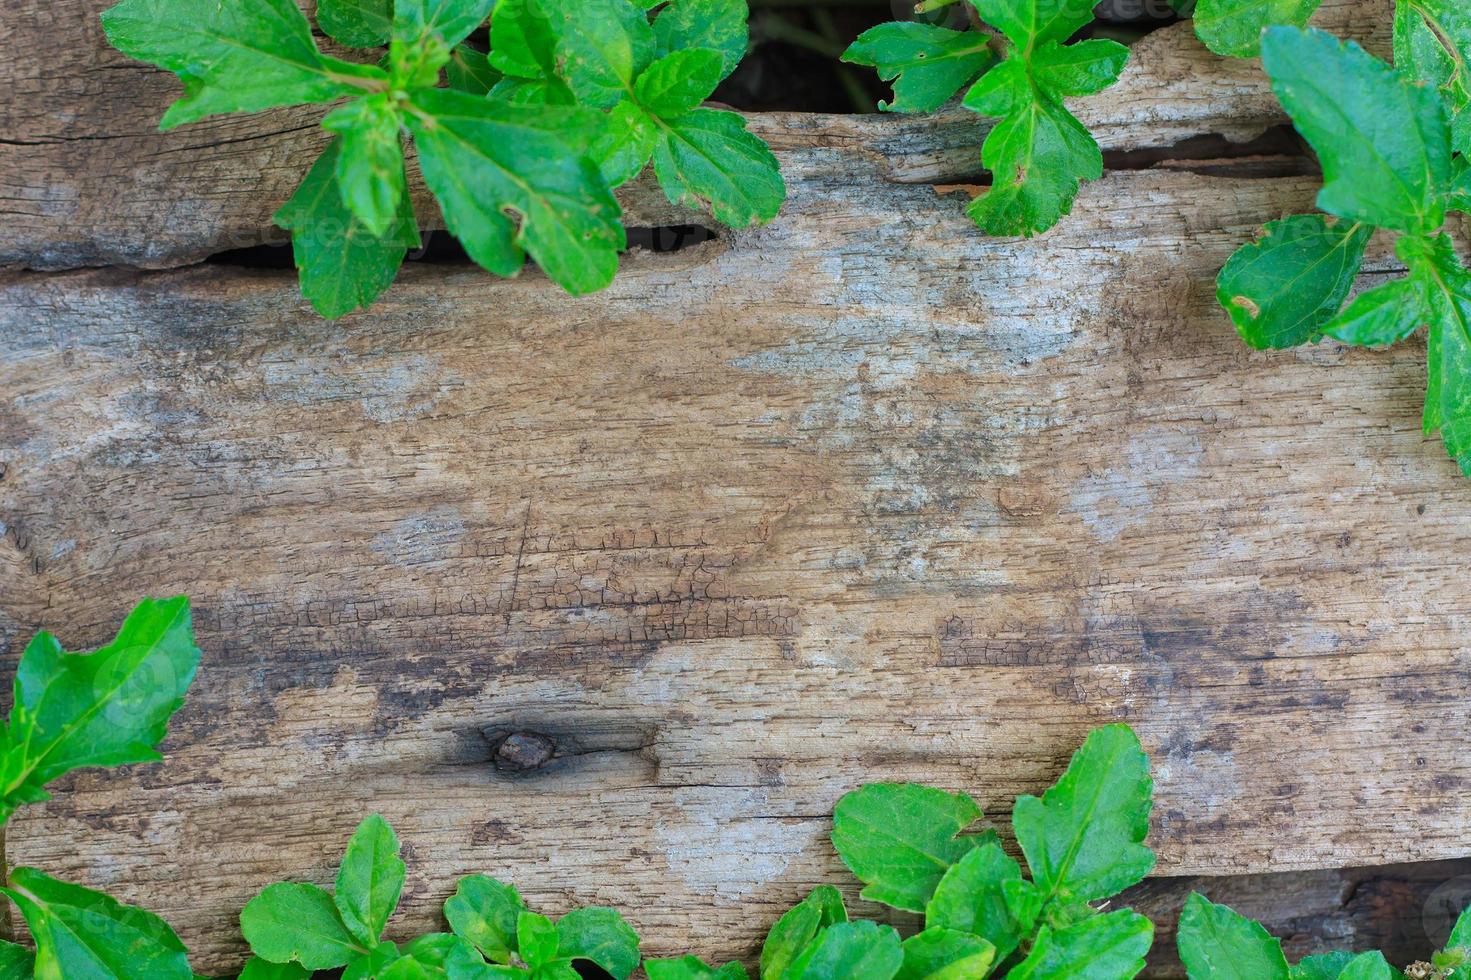 green ivy leaves over wooden background with copy space photo